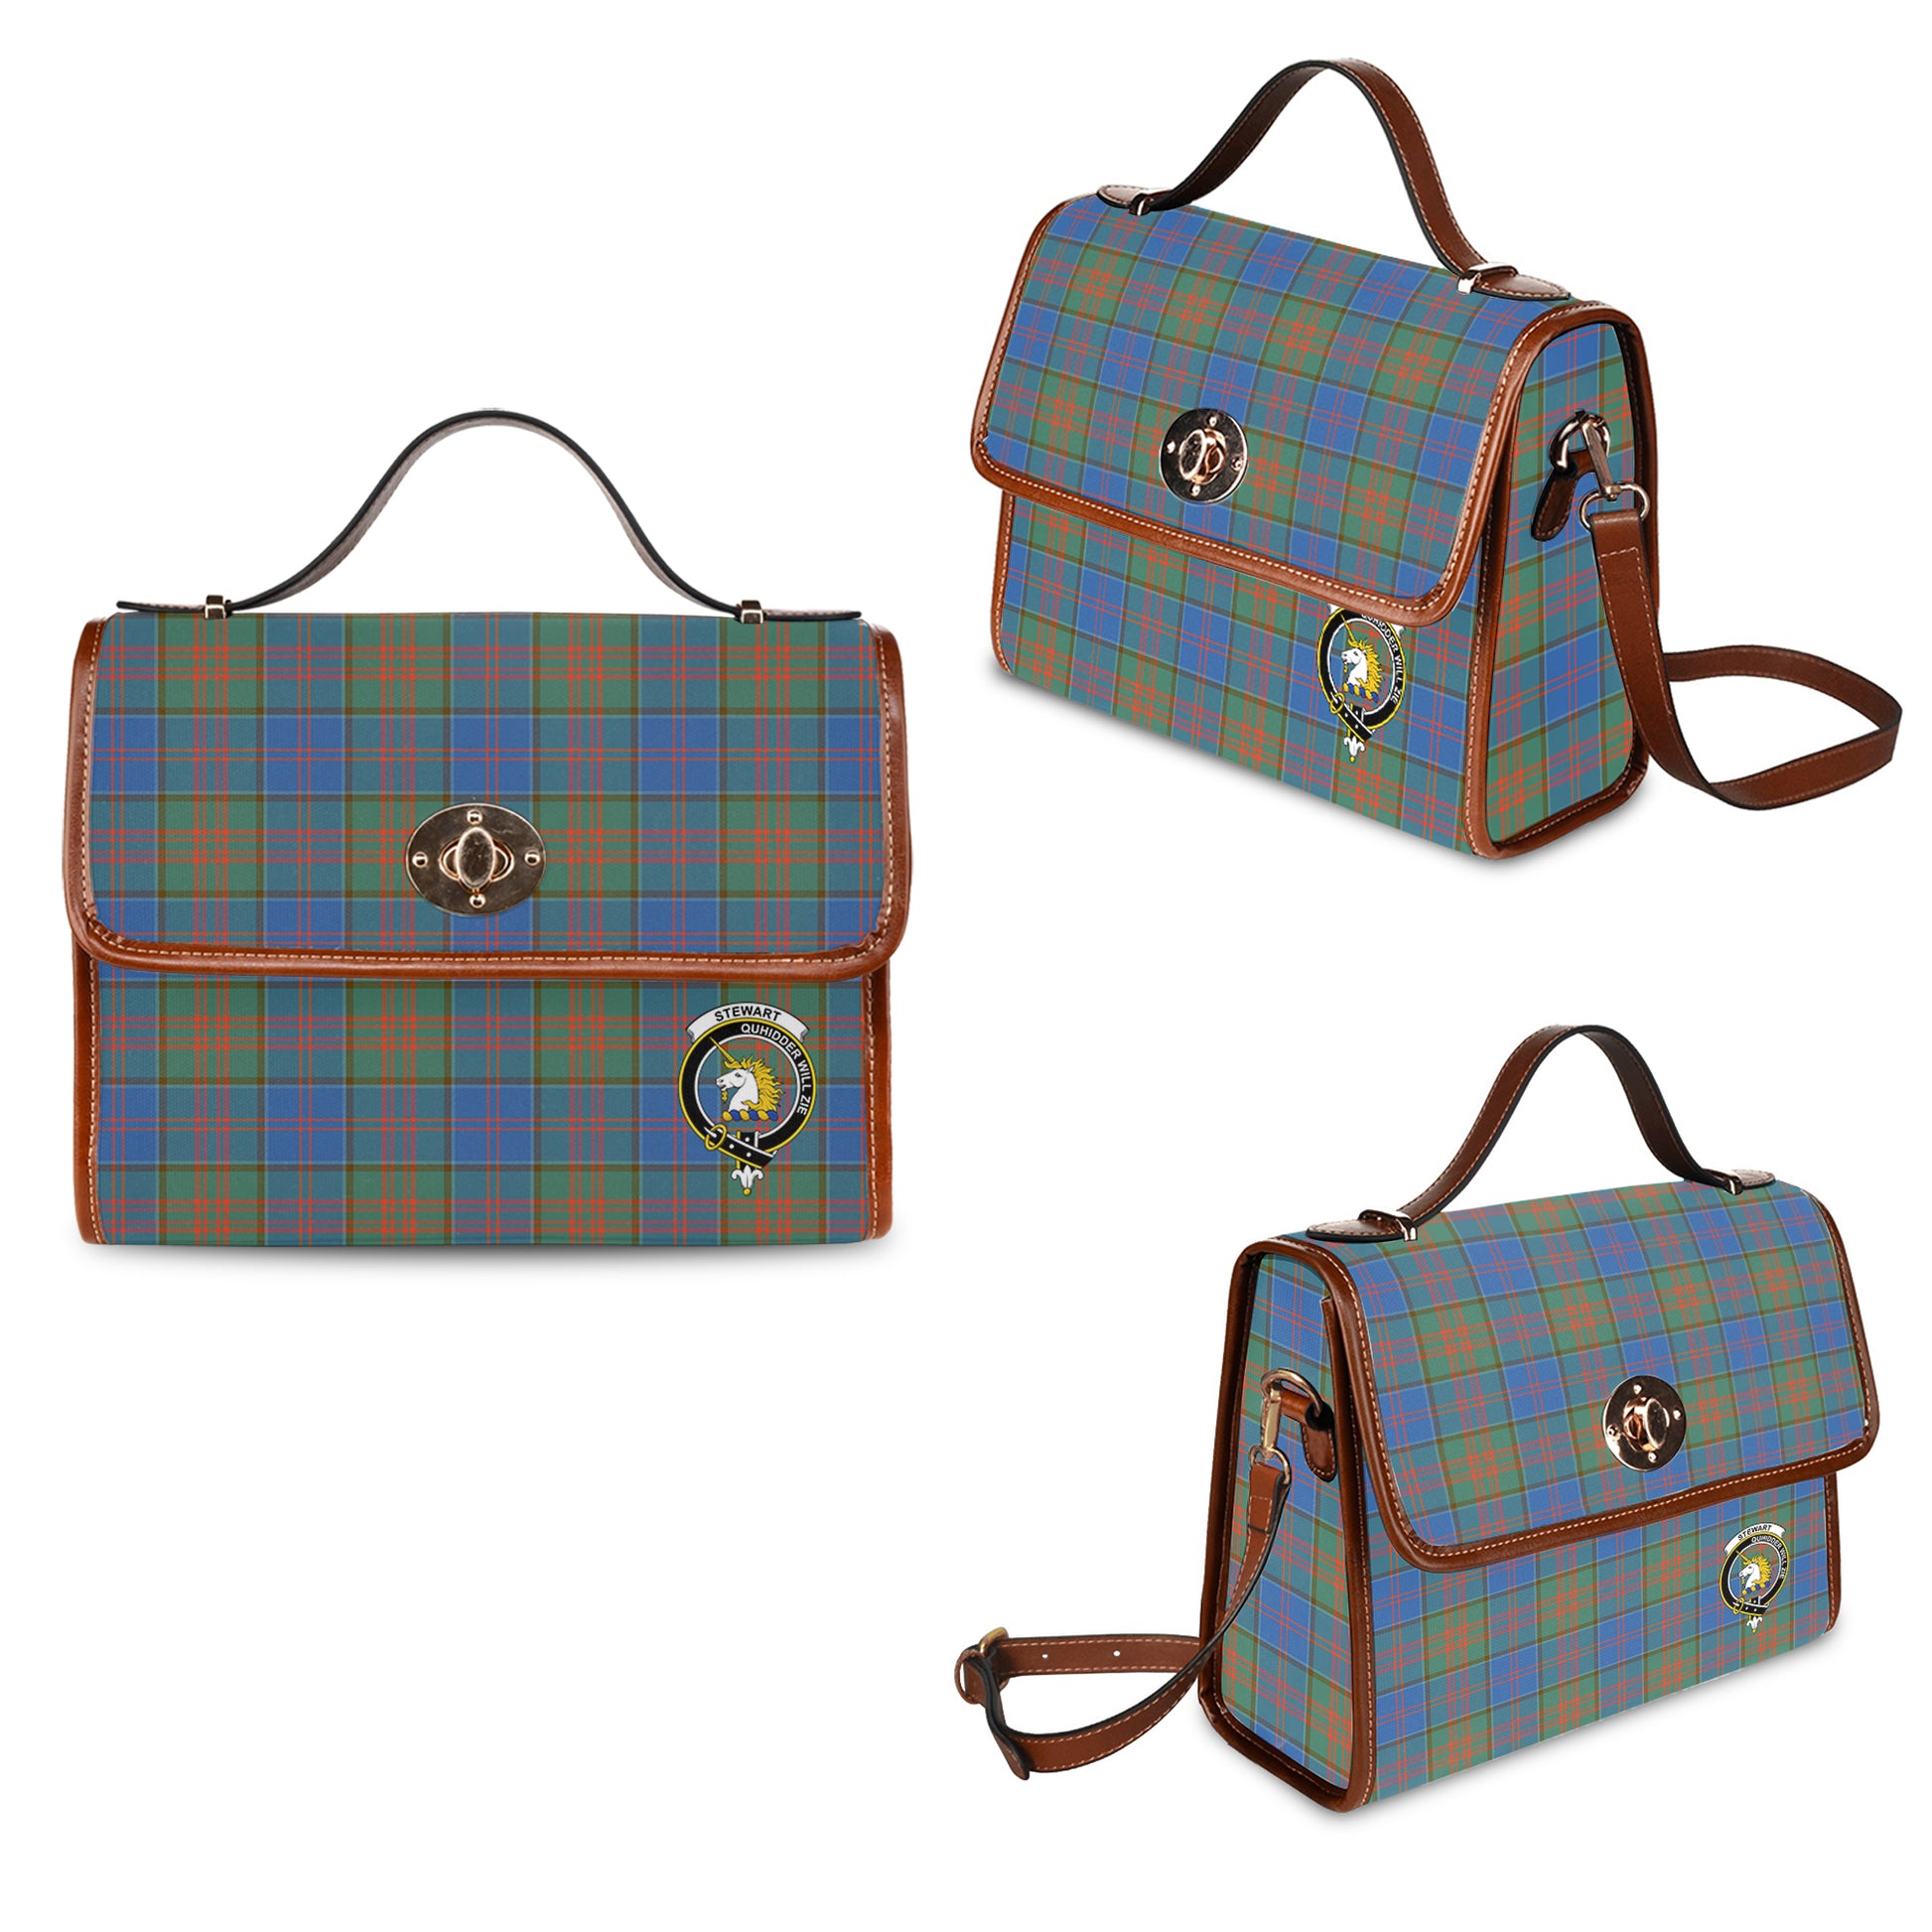 Stewart of Appin Hunting Ancient Tartan Leather Strap Waterproof Canvas Bag with Family Crest One Size 34cm * 42cm (13.4" x 16.5") - Tartanvibesclothing